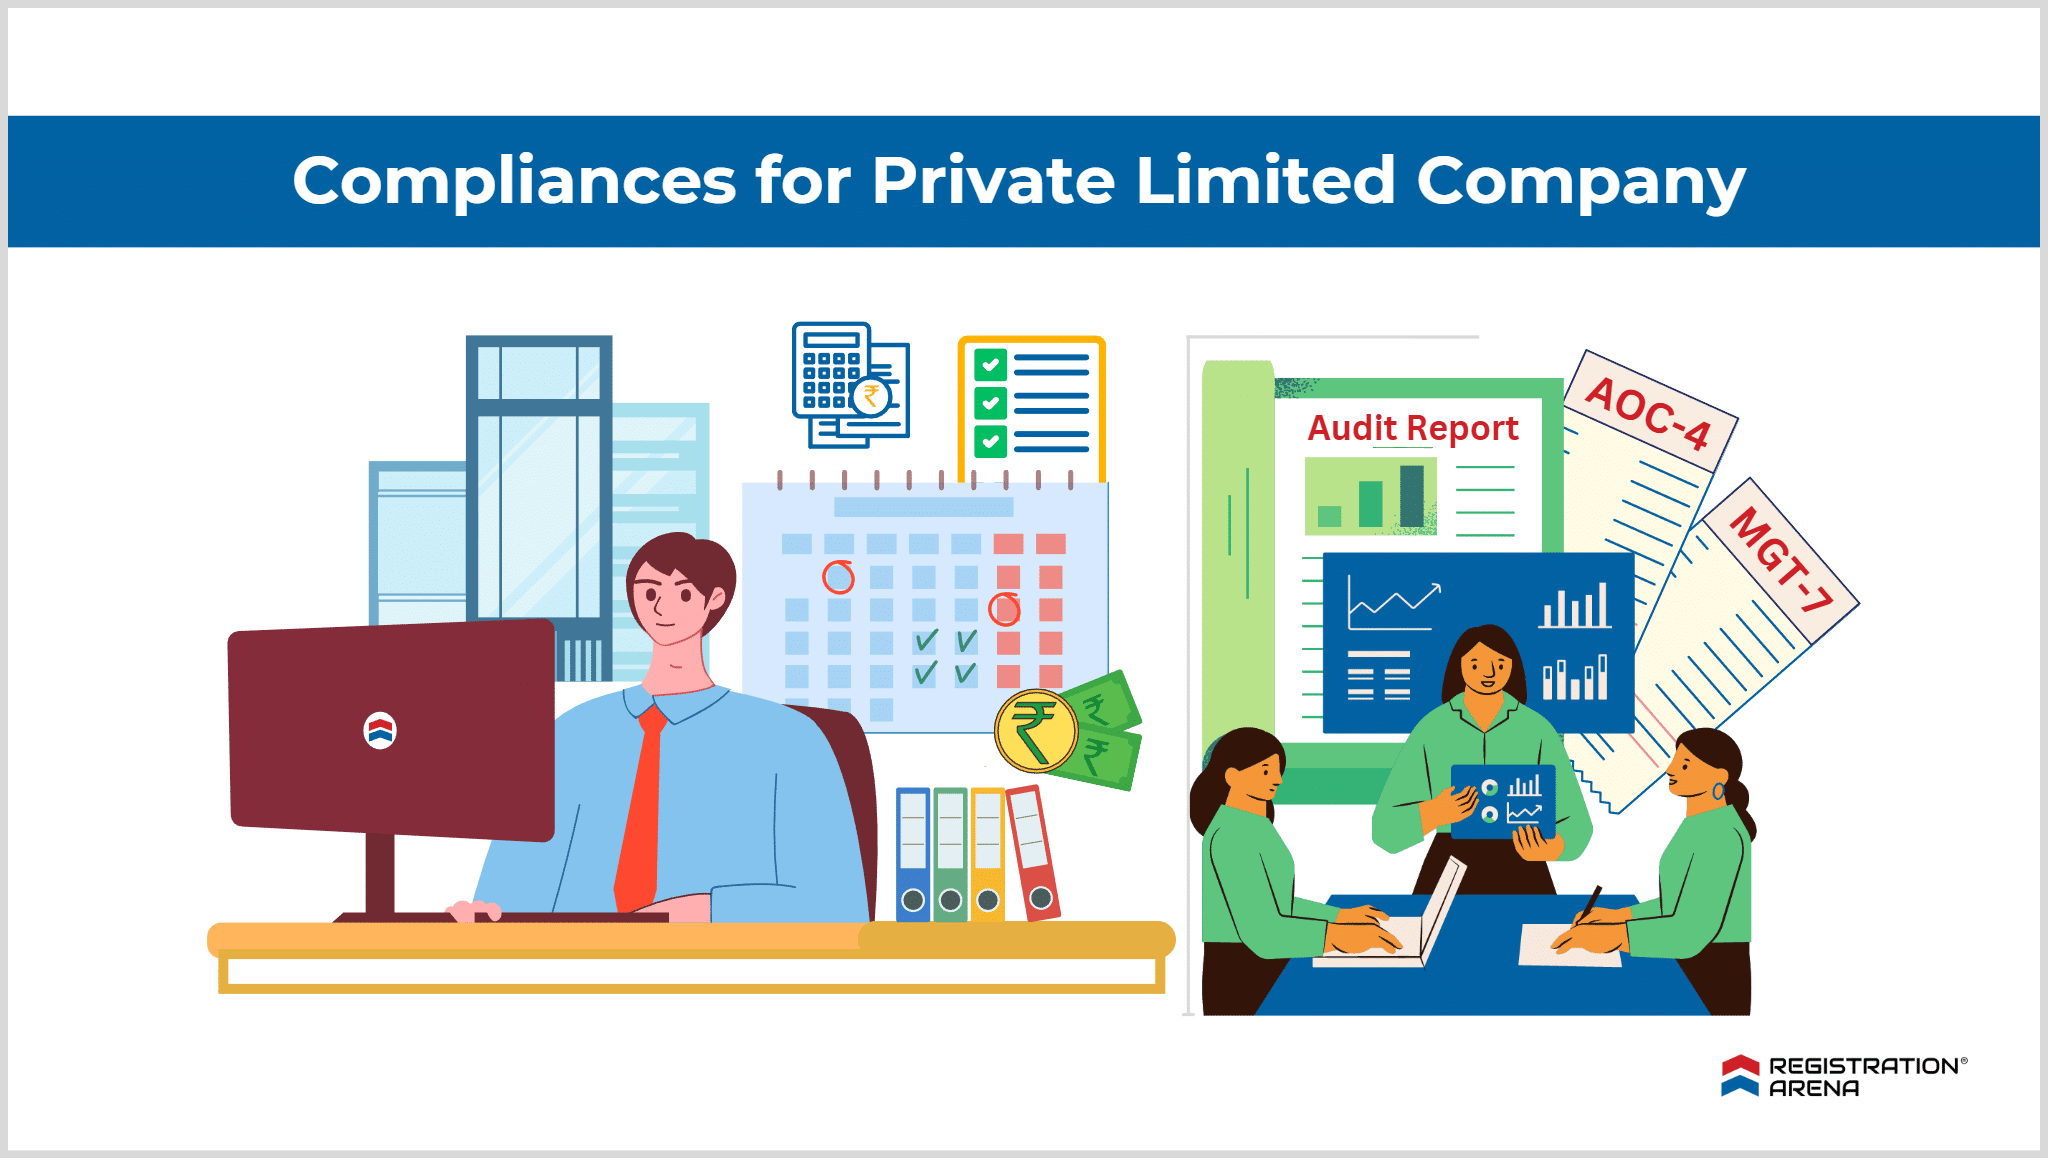 Compliances for Private limited companies